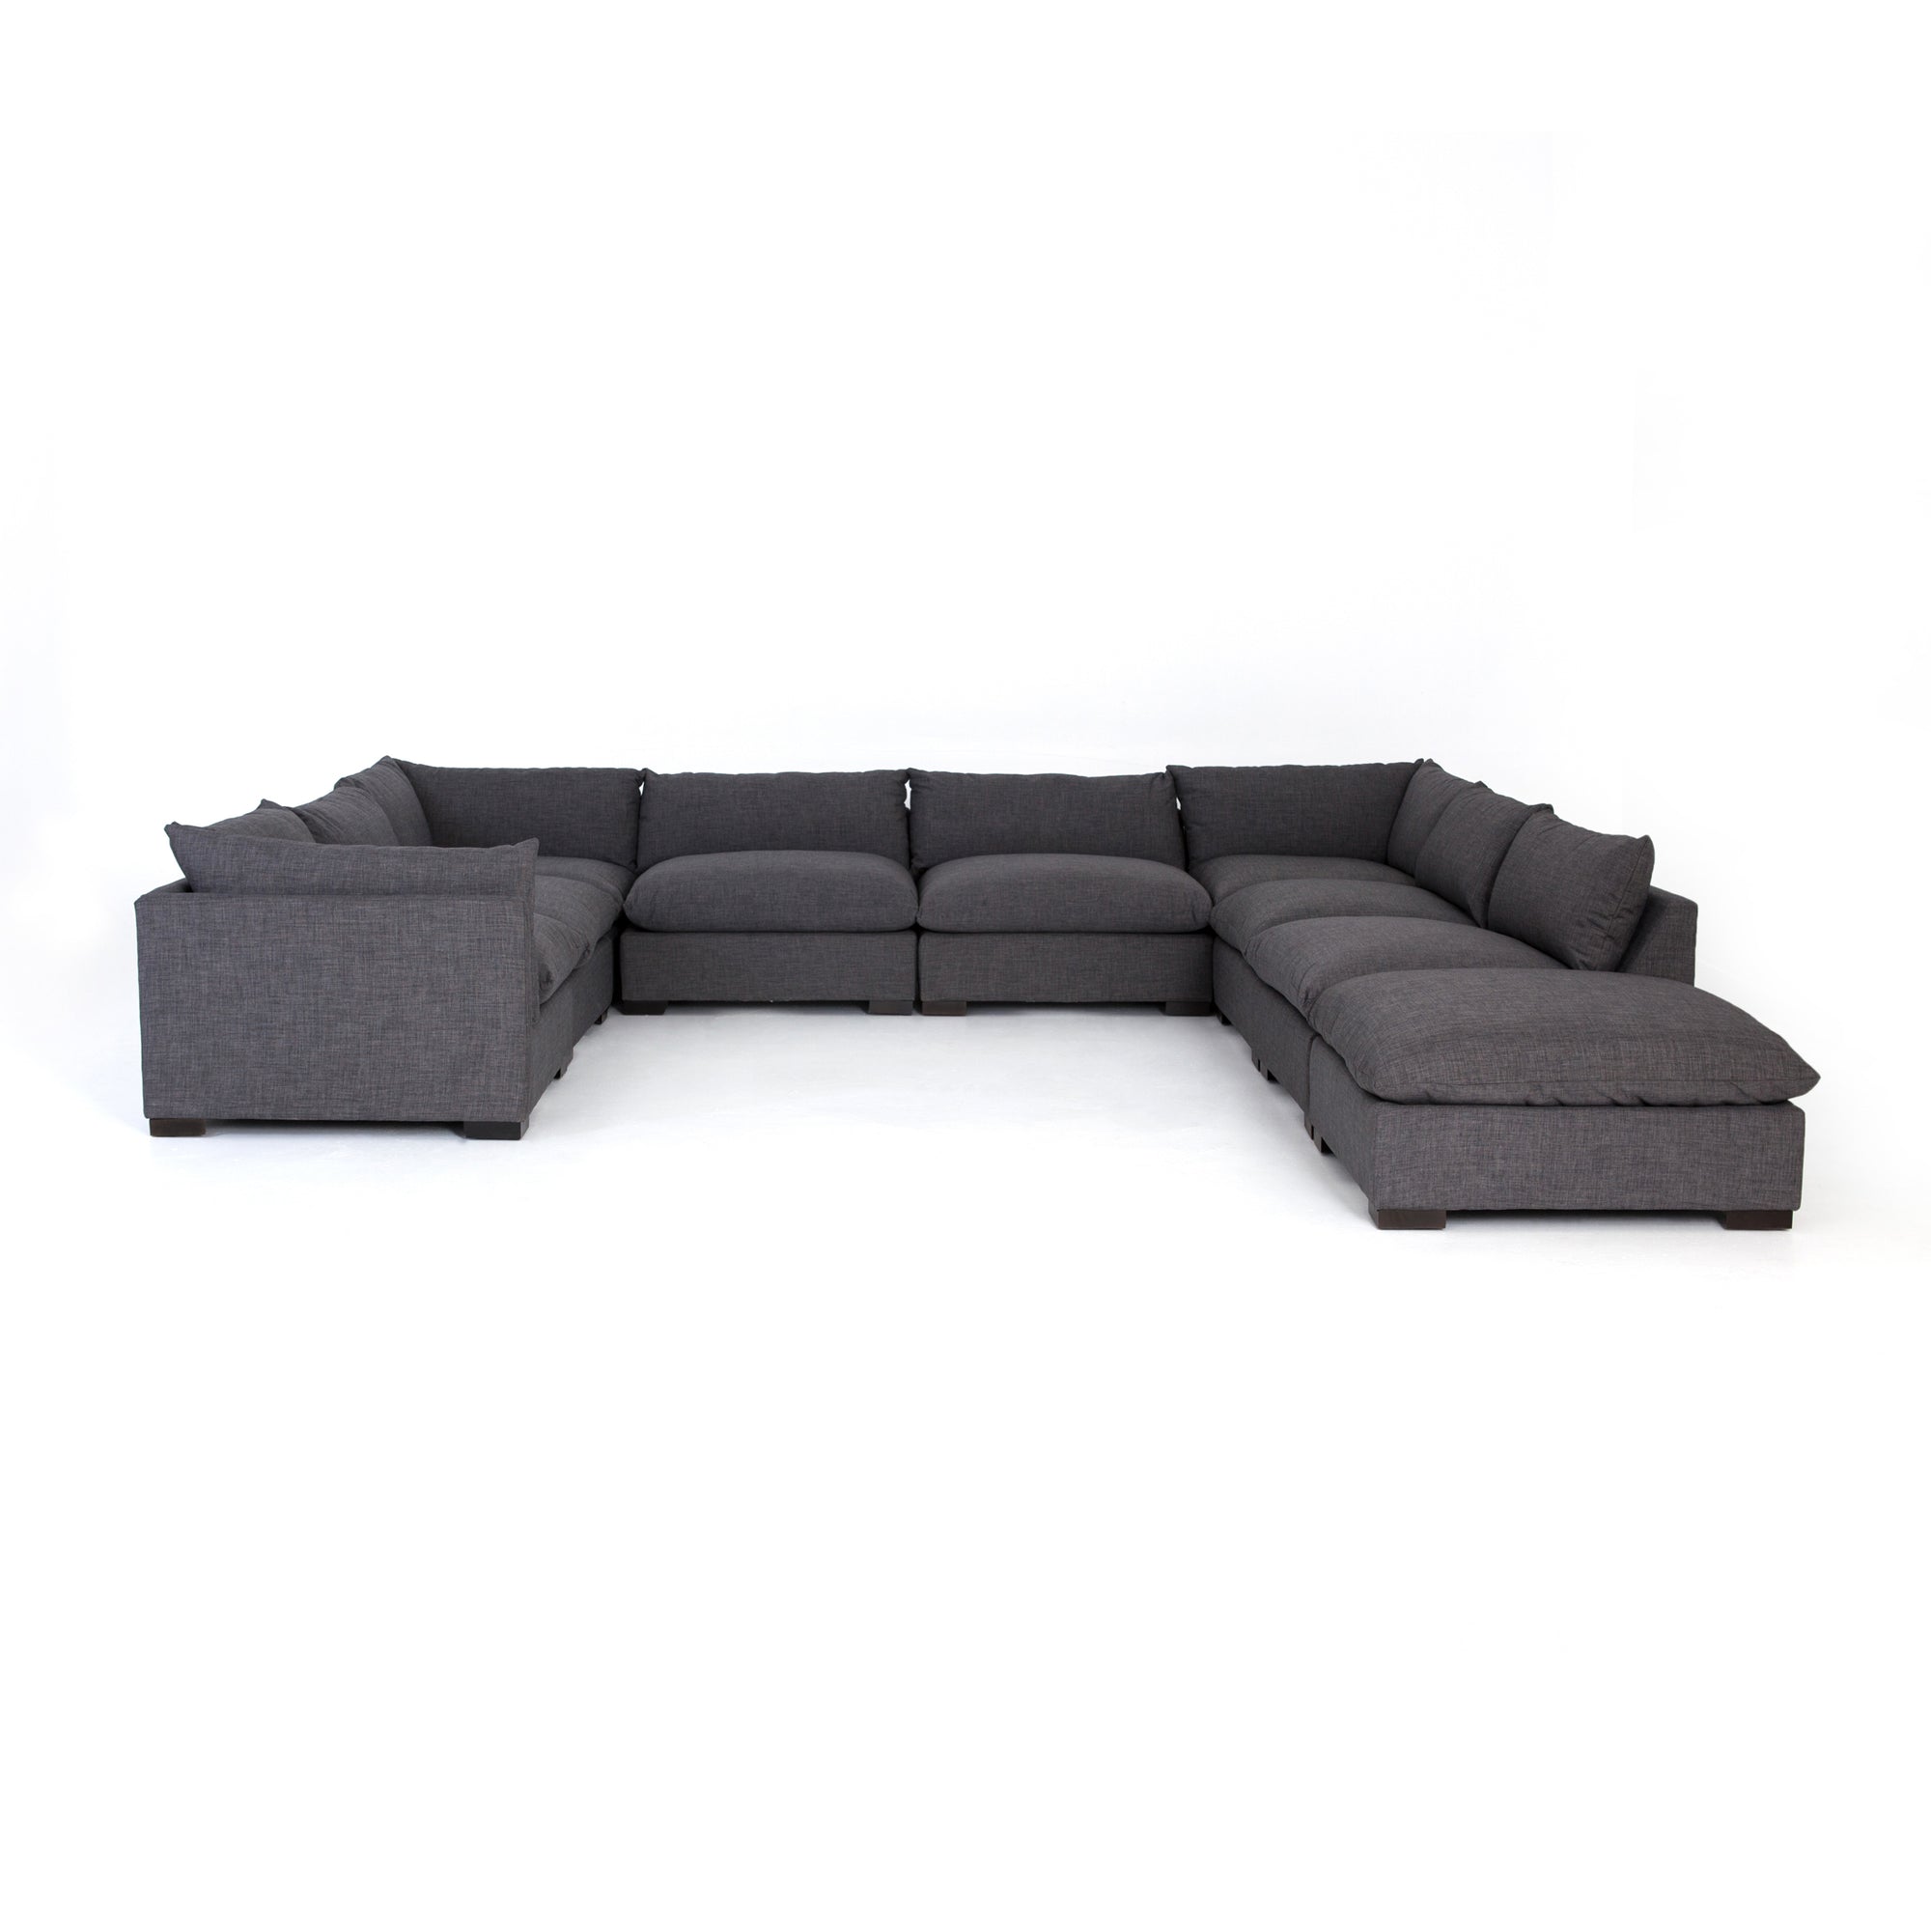 Westwood 8 Piece Sectional with Ottoman